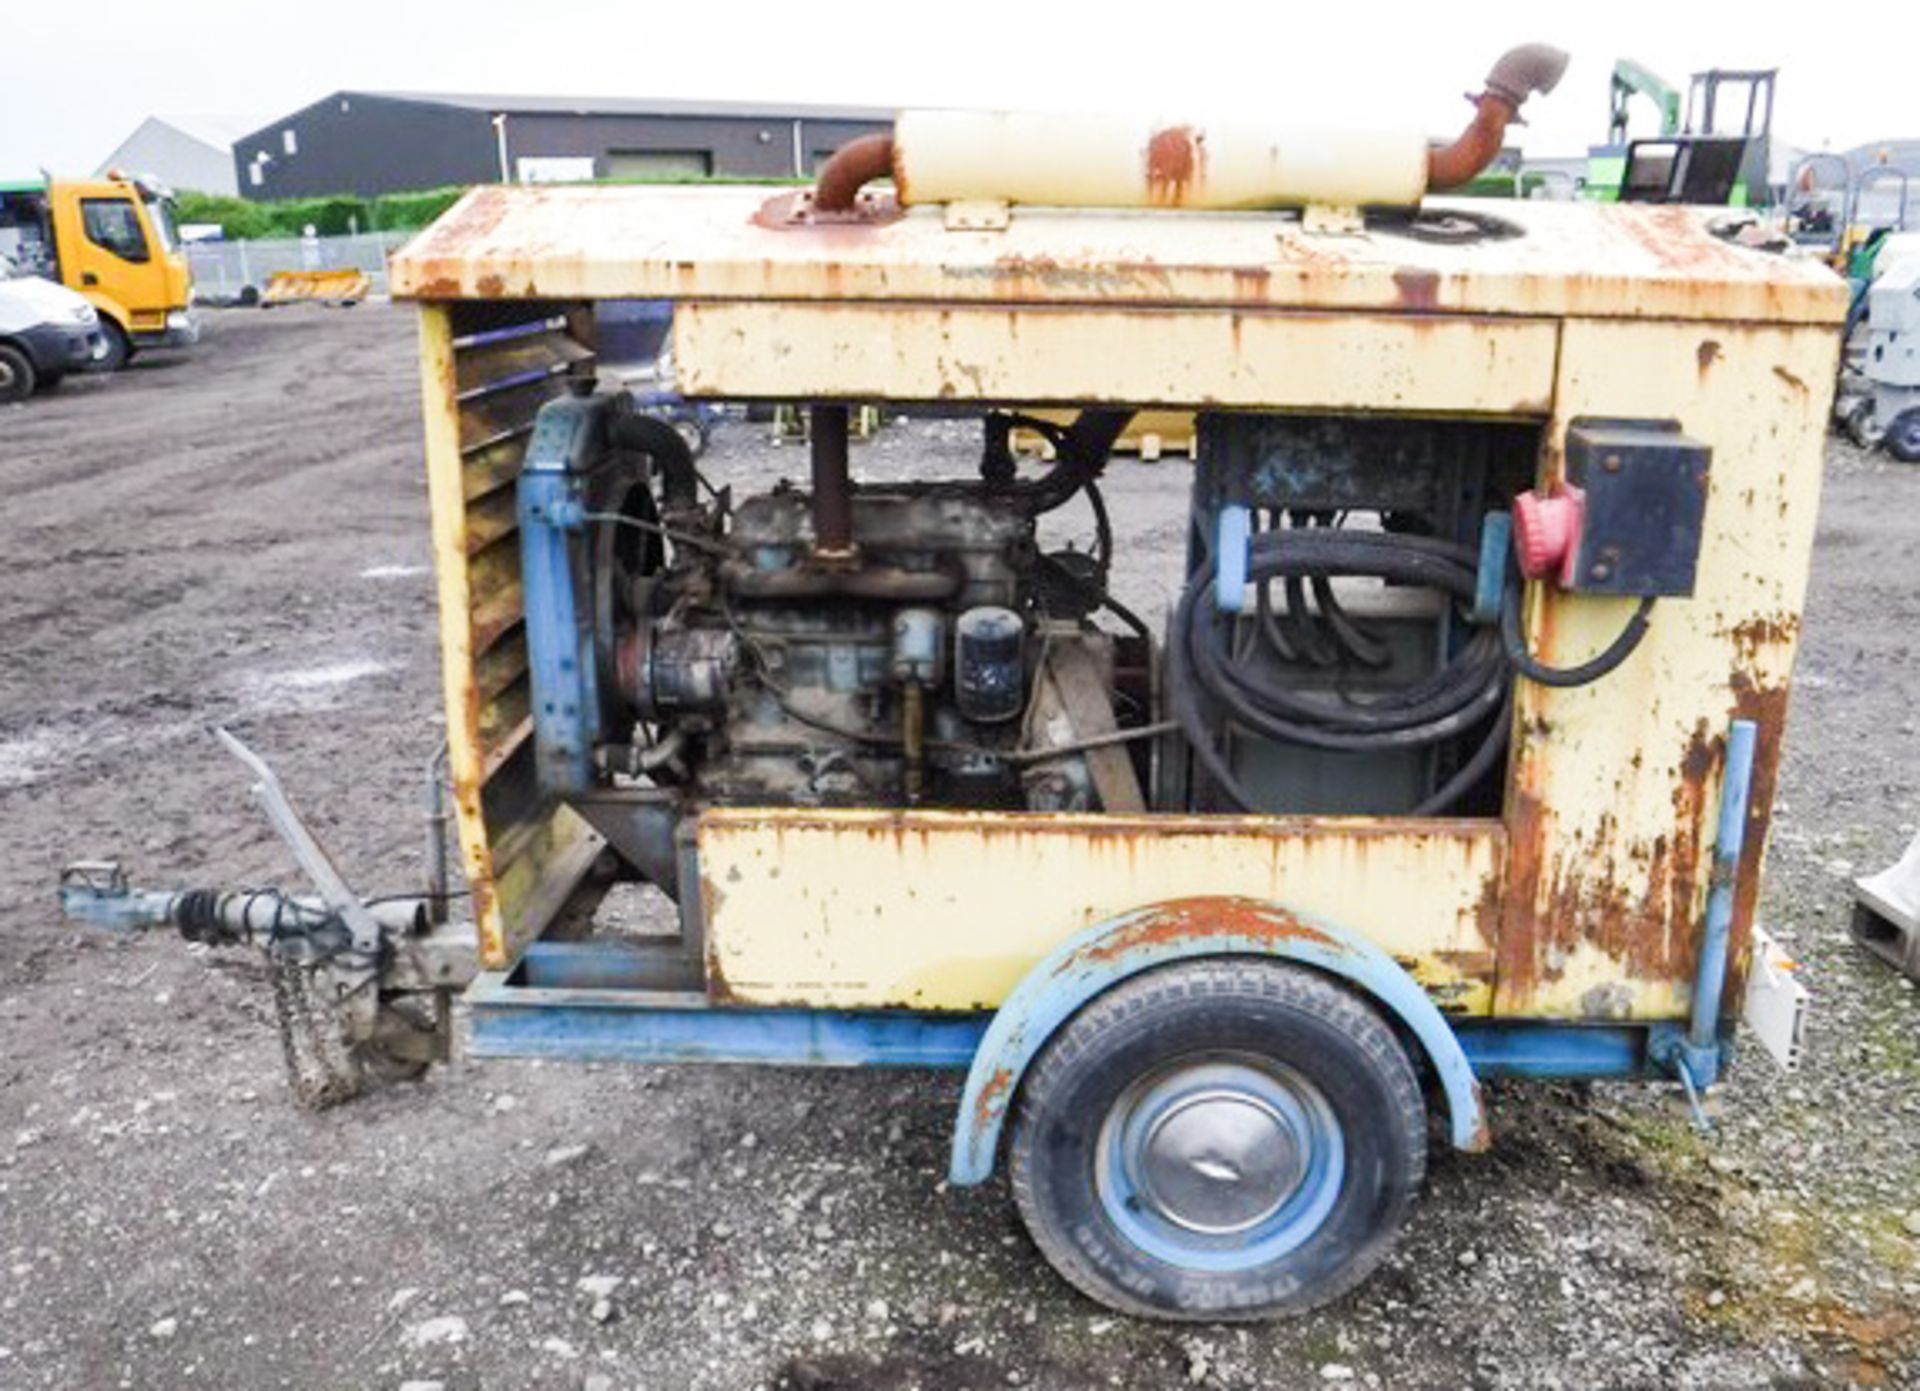 FAST TOW DIESEL GENERATOR, 3 PHASE, 1993HRS (NOT VERIFIED) - Image 2 of 6